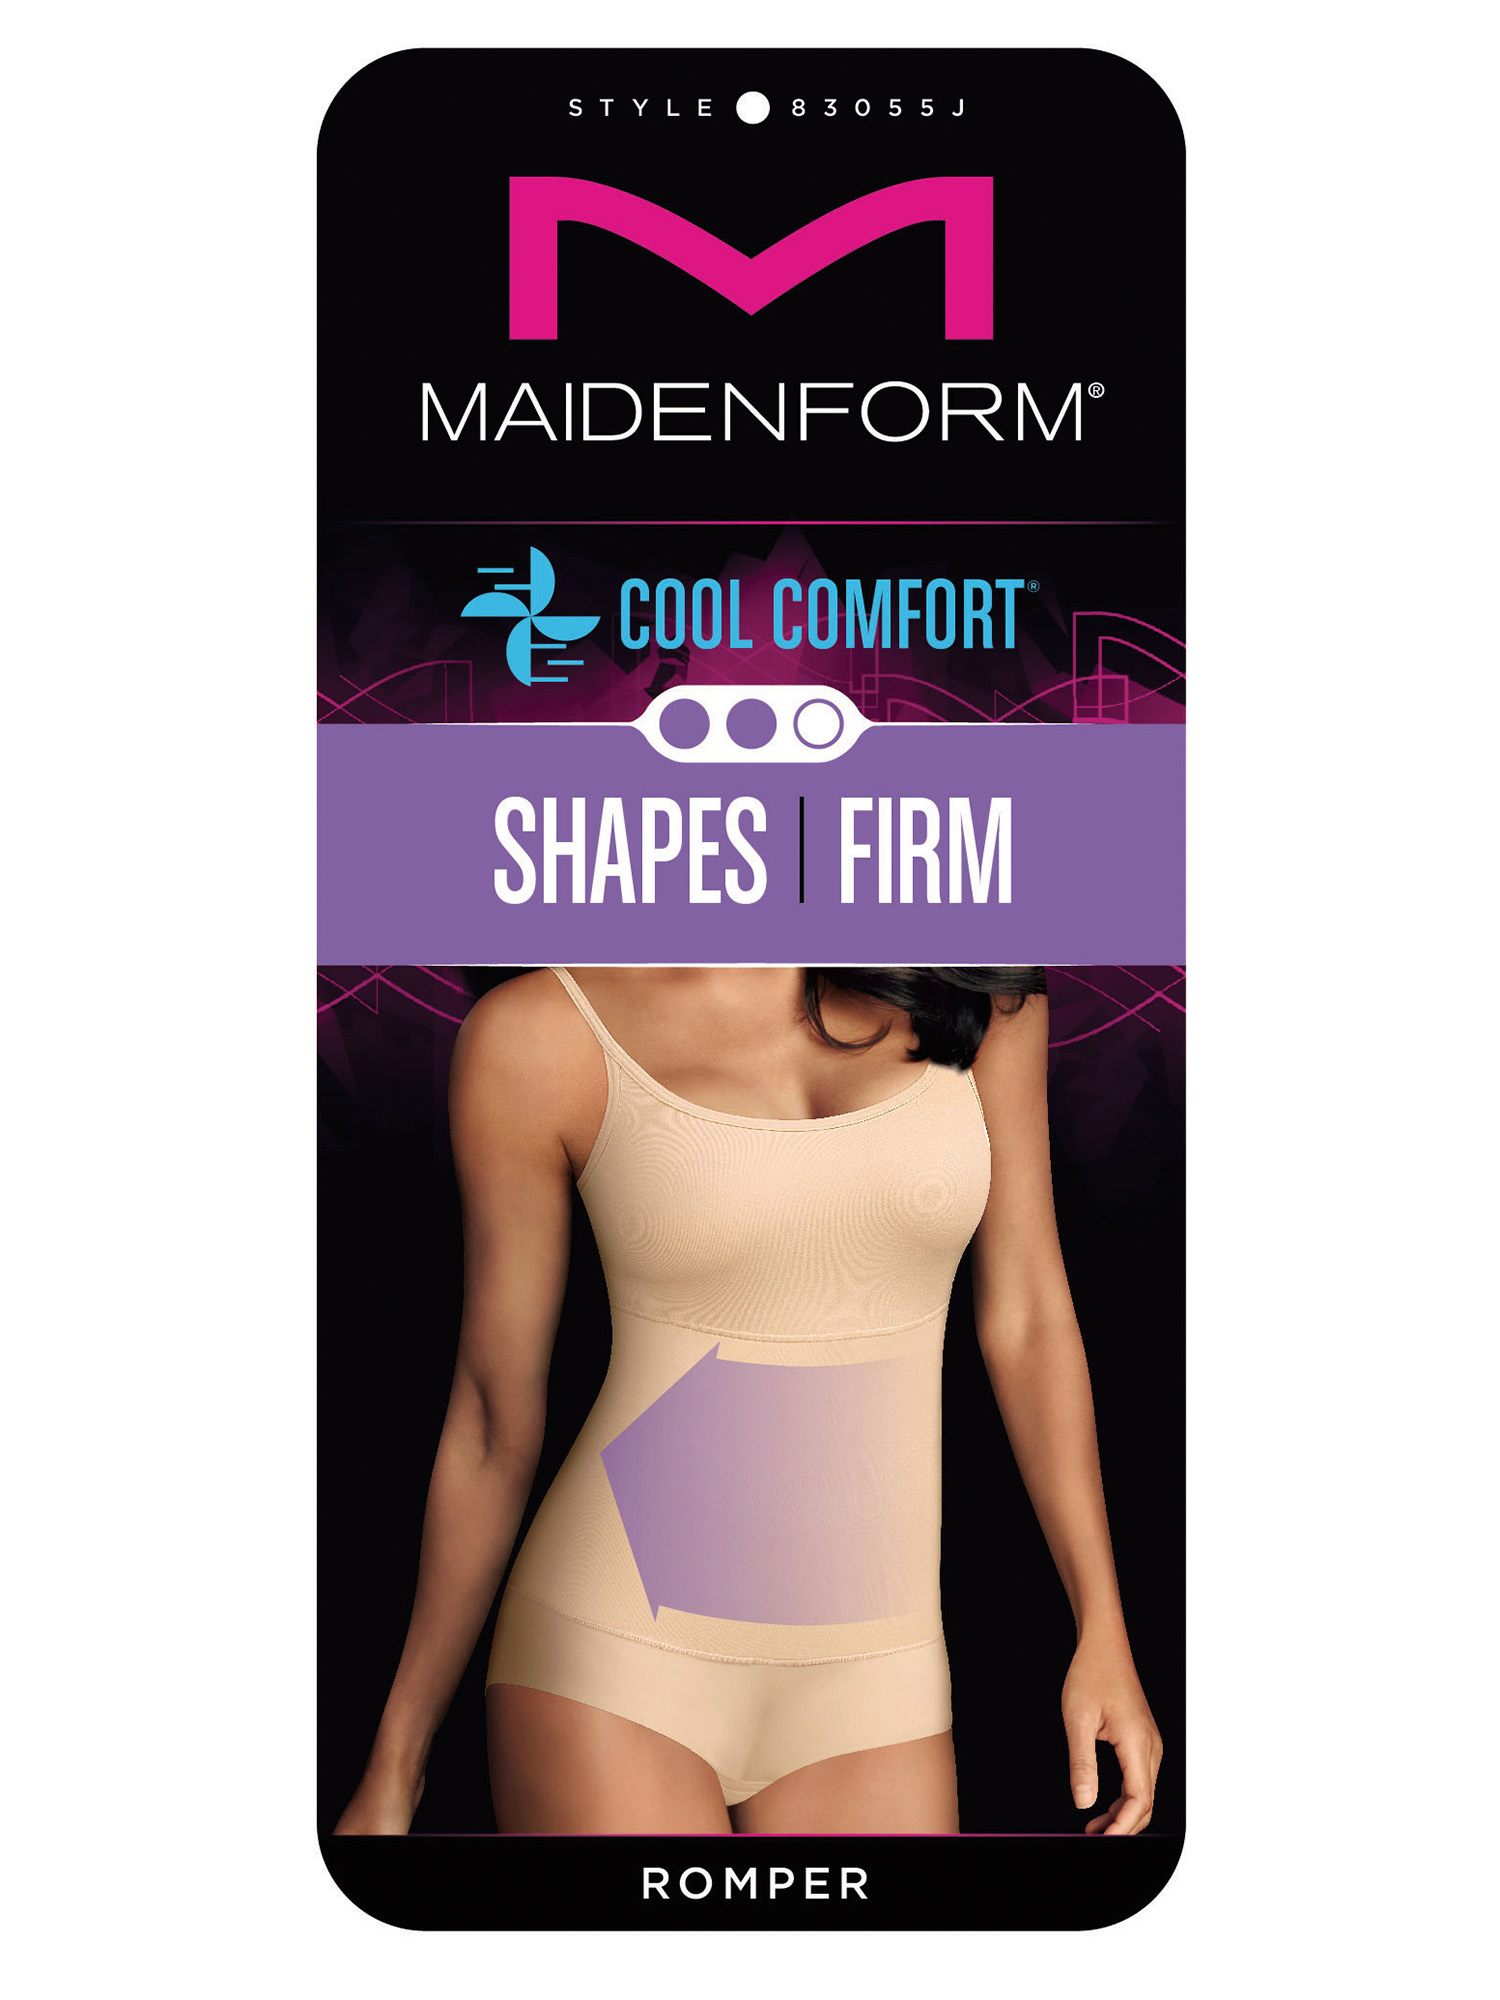 Maidenform firm control shaping romper - image 2 of 4